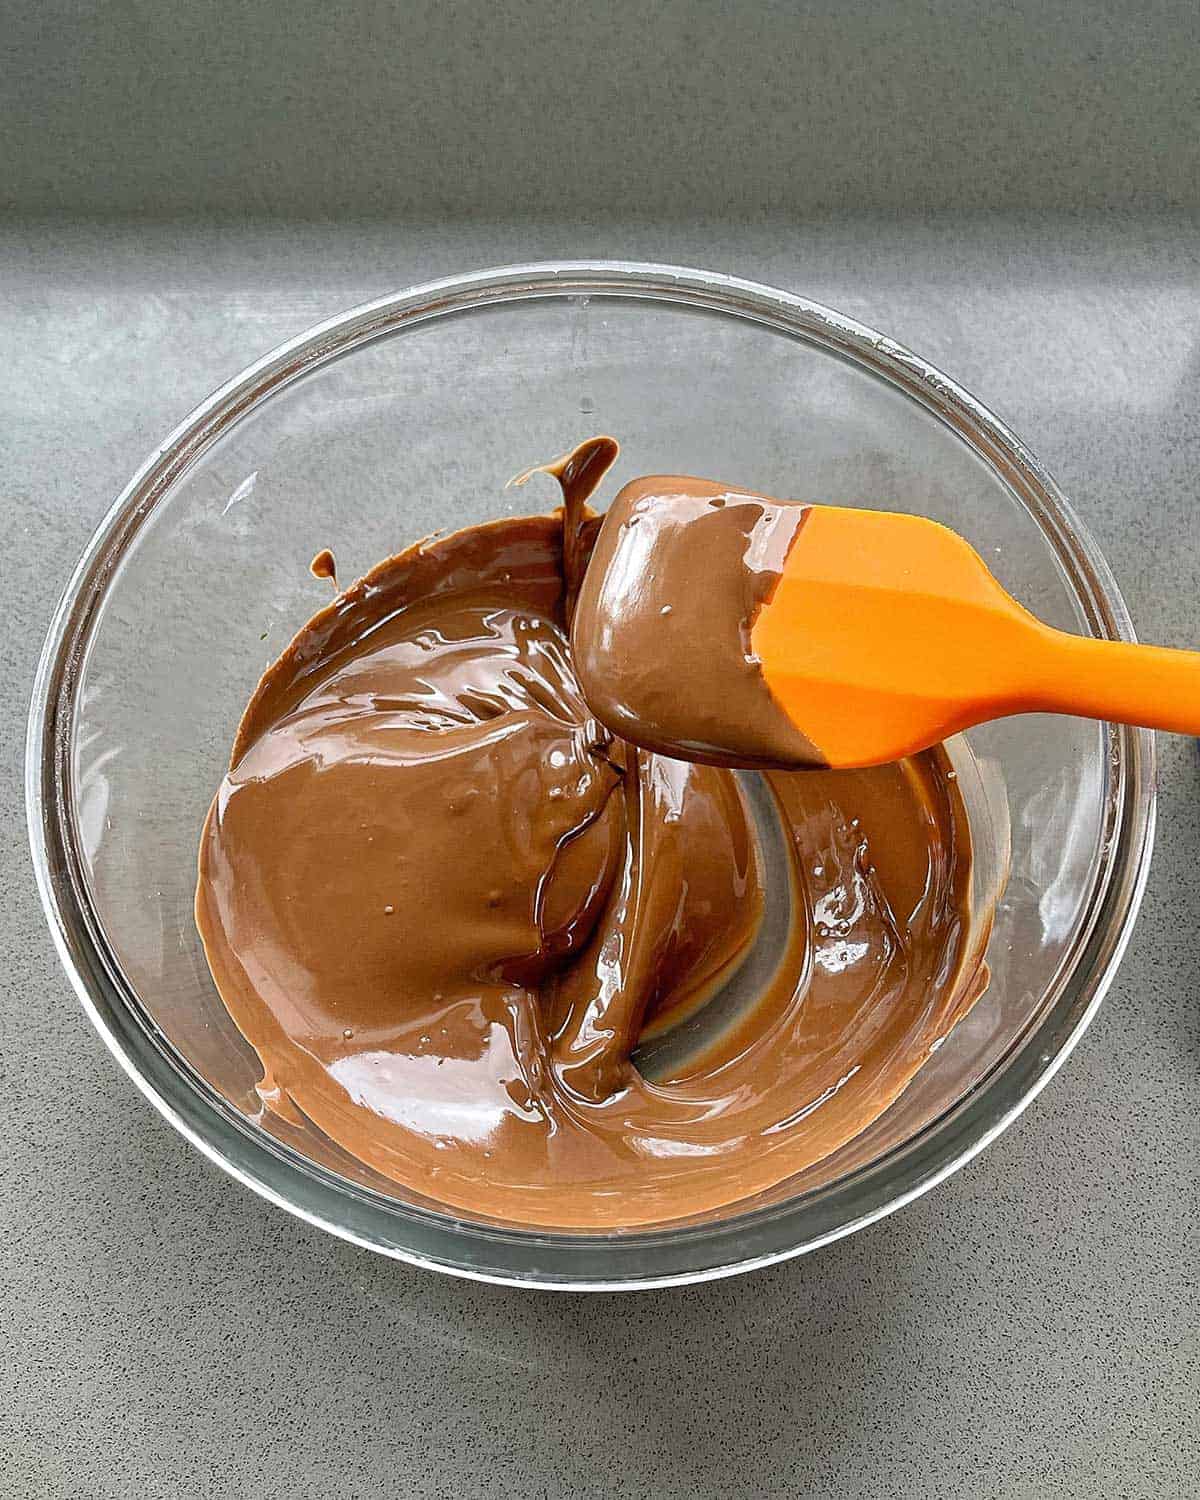 Melted chocolate in a bowl with a spatula on the side.